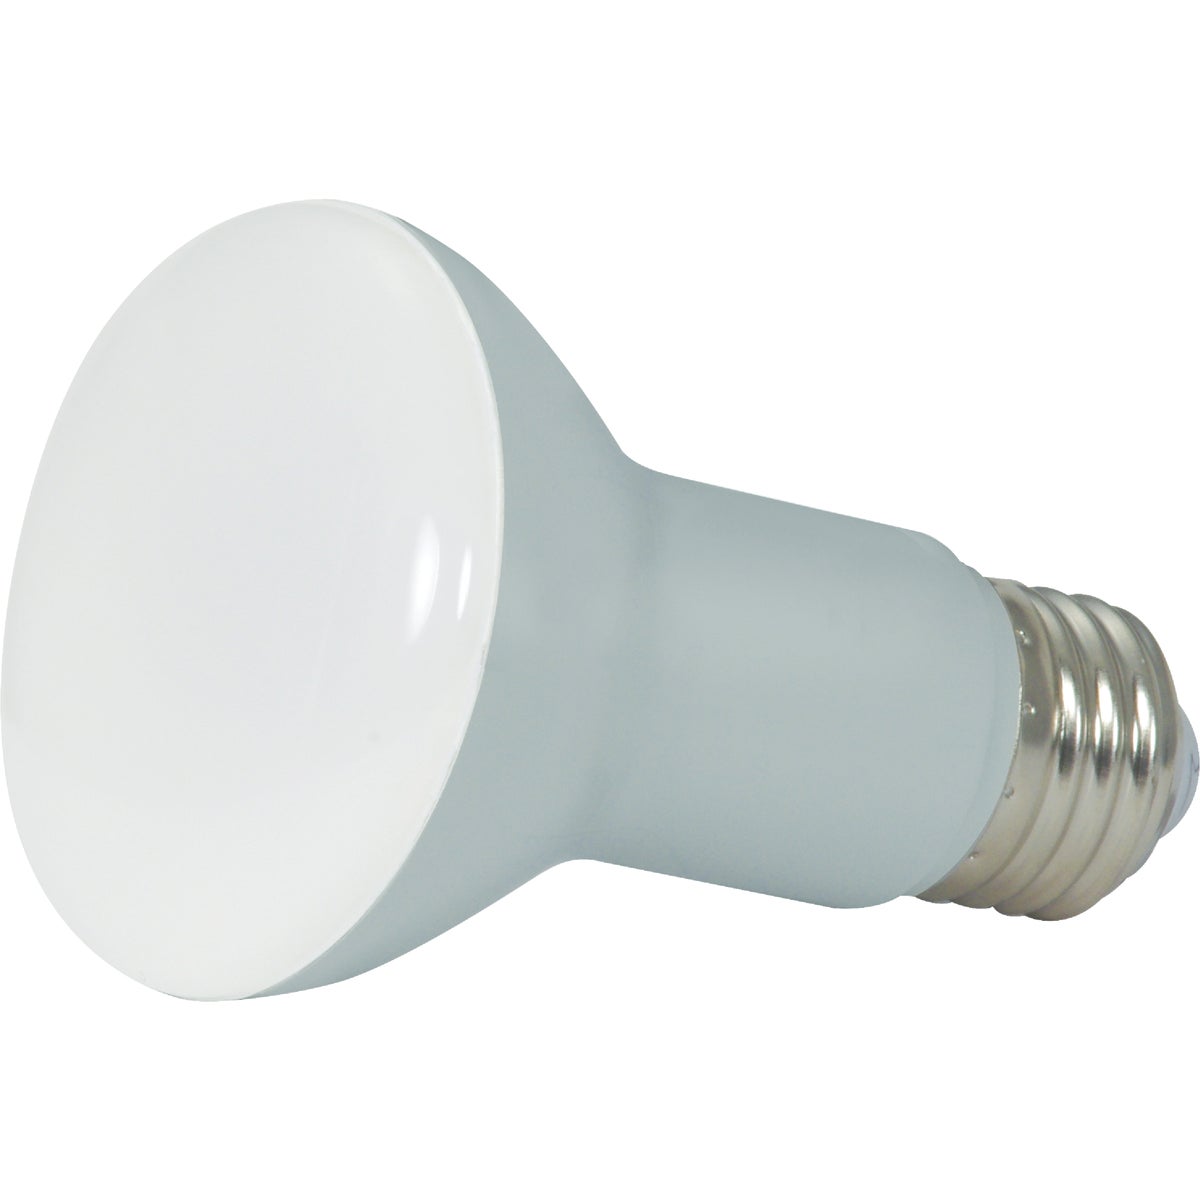 Item 562710, Dimmable, solid state R20 LED (light emitting diode) light bulb with medium